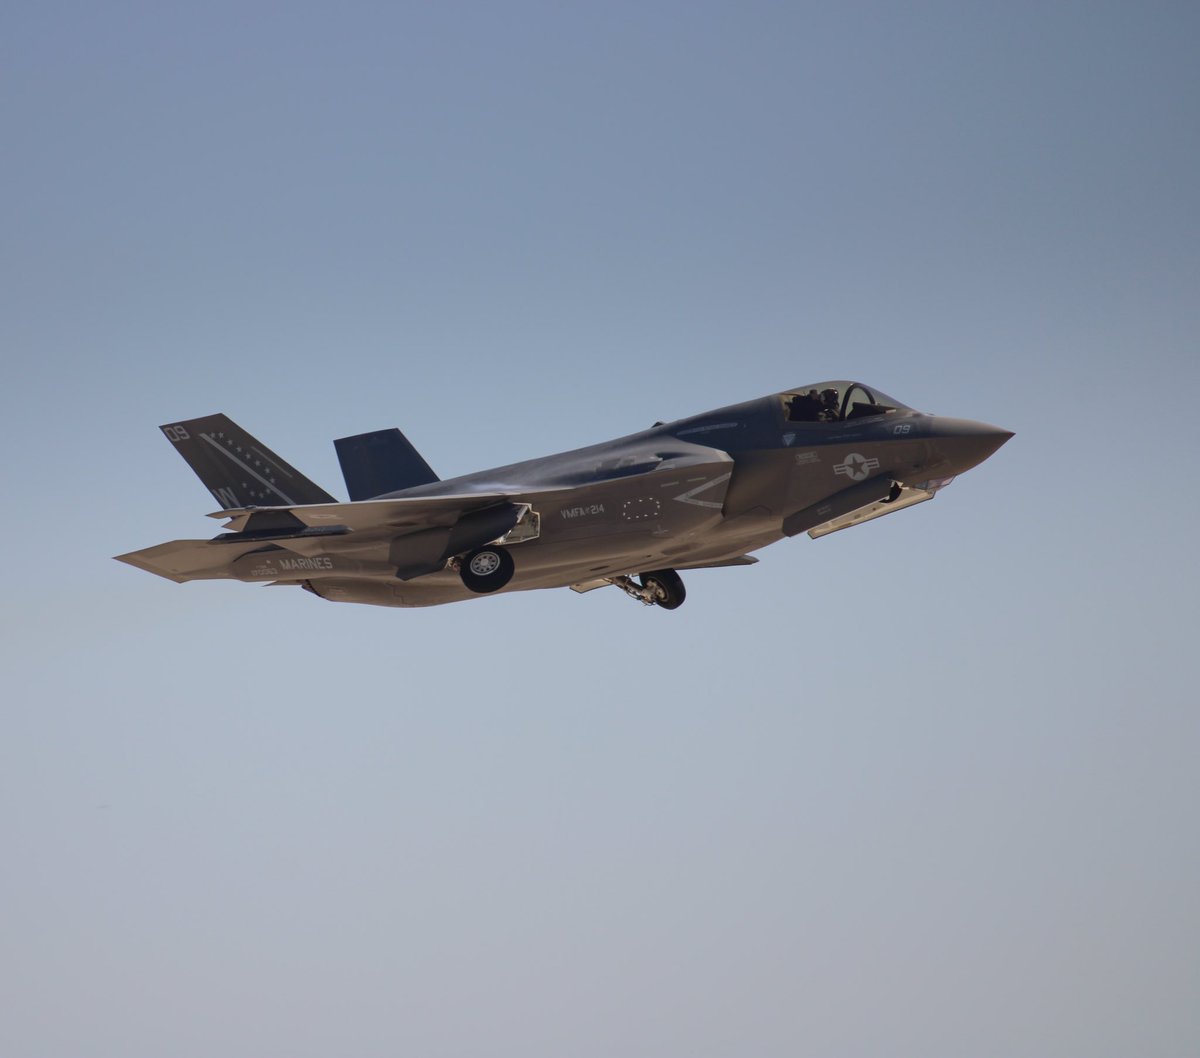 Black sheep f-35bs preforming for the magtf